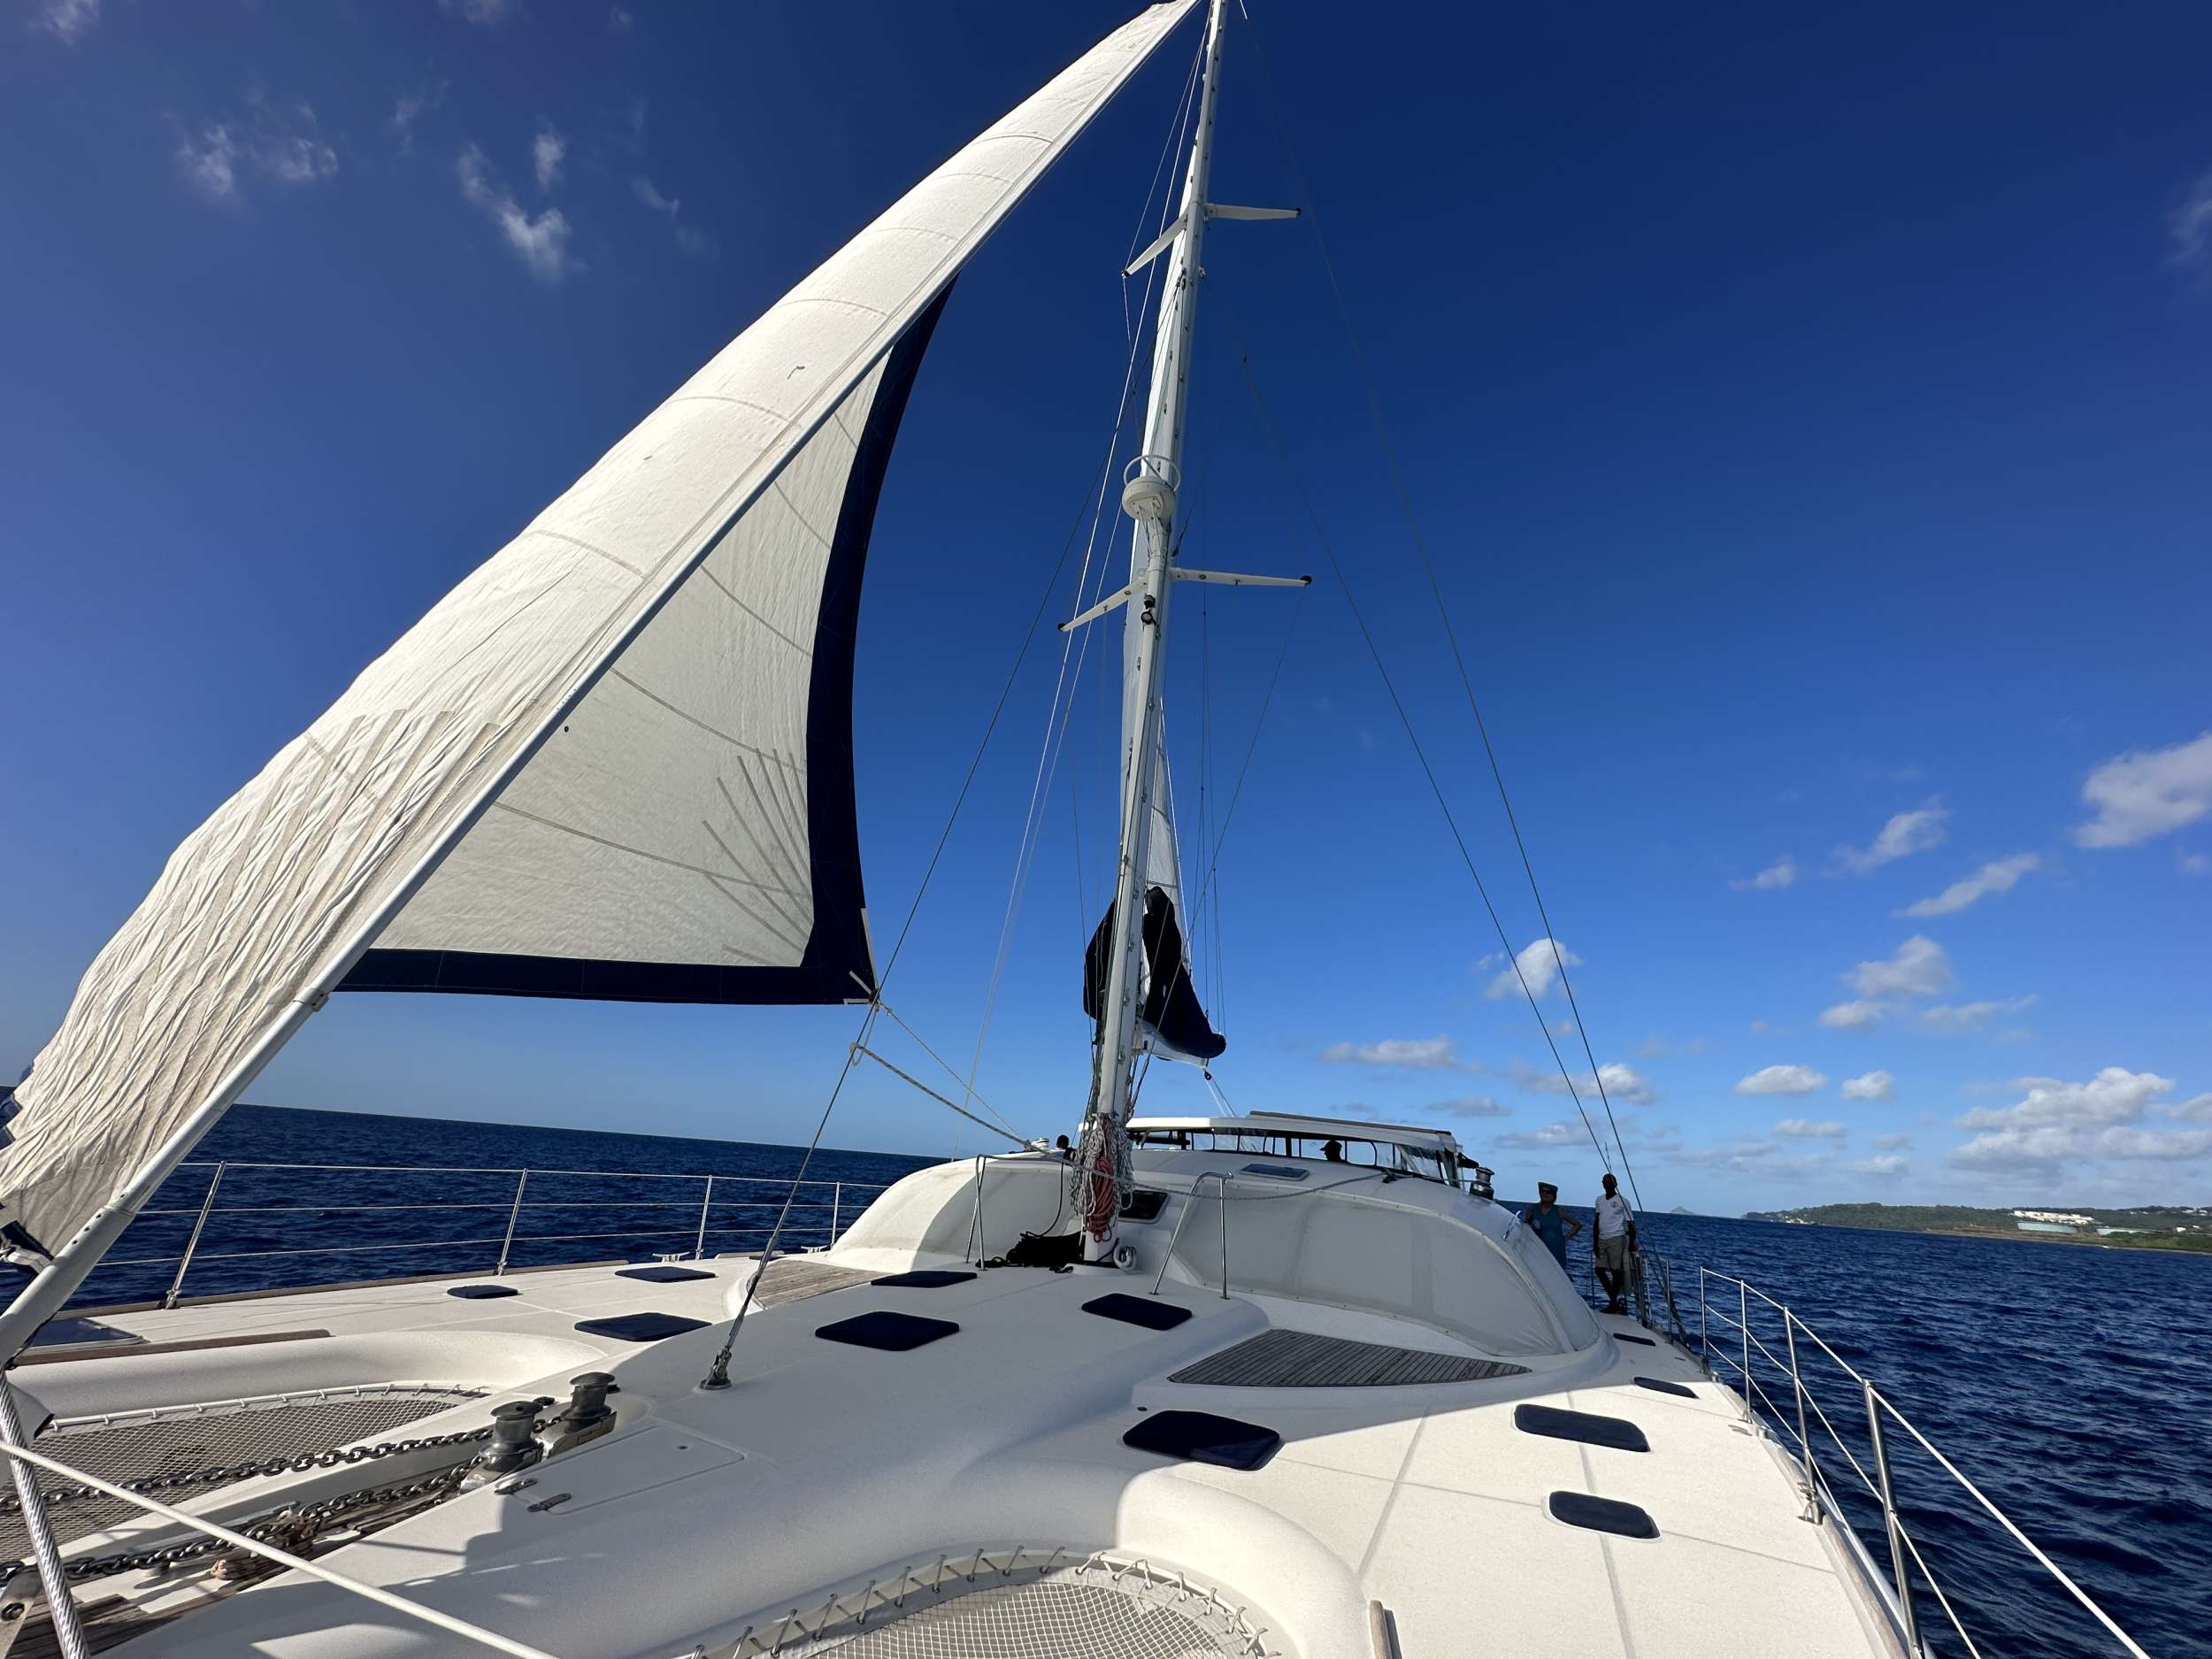 Lady Marigot - Yacht Charter Sea Cow Bay & Boat hire in Caribbean 1